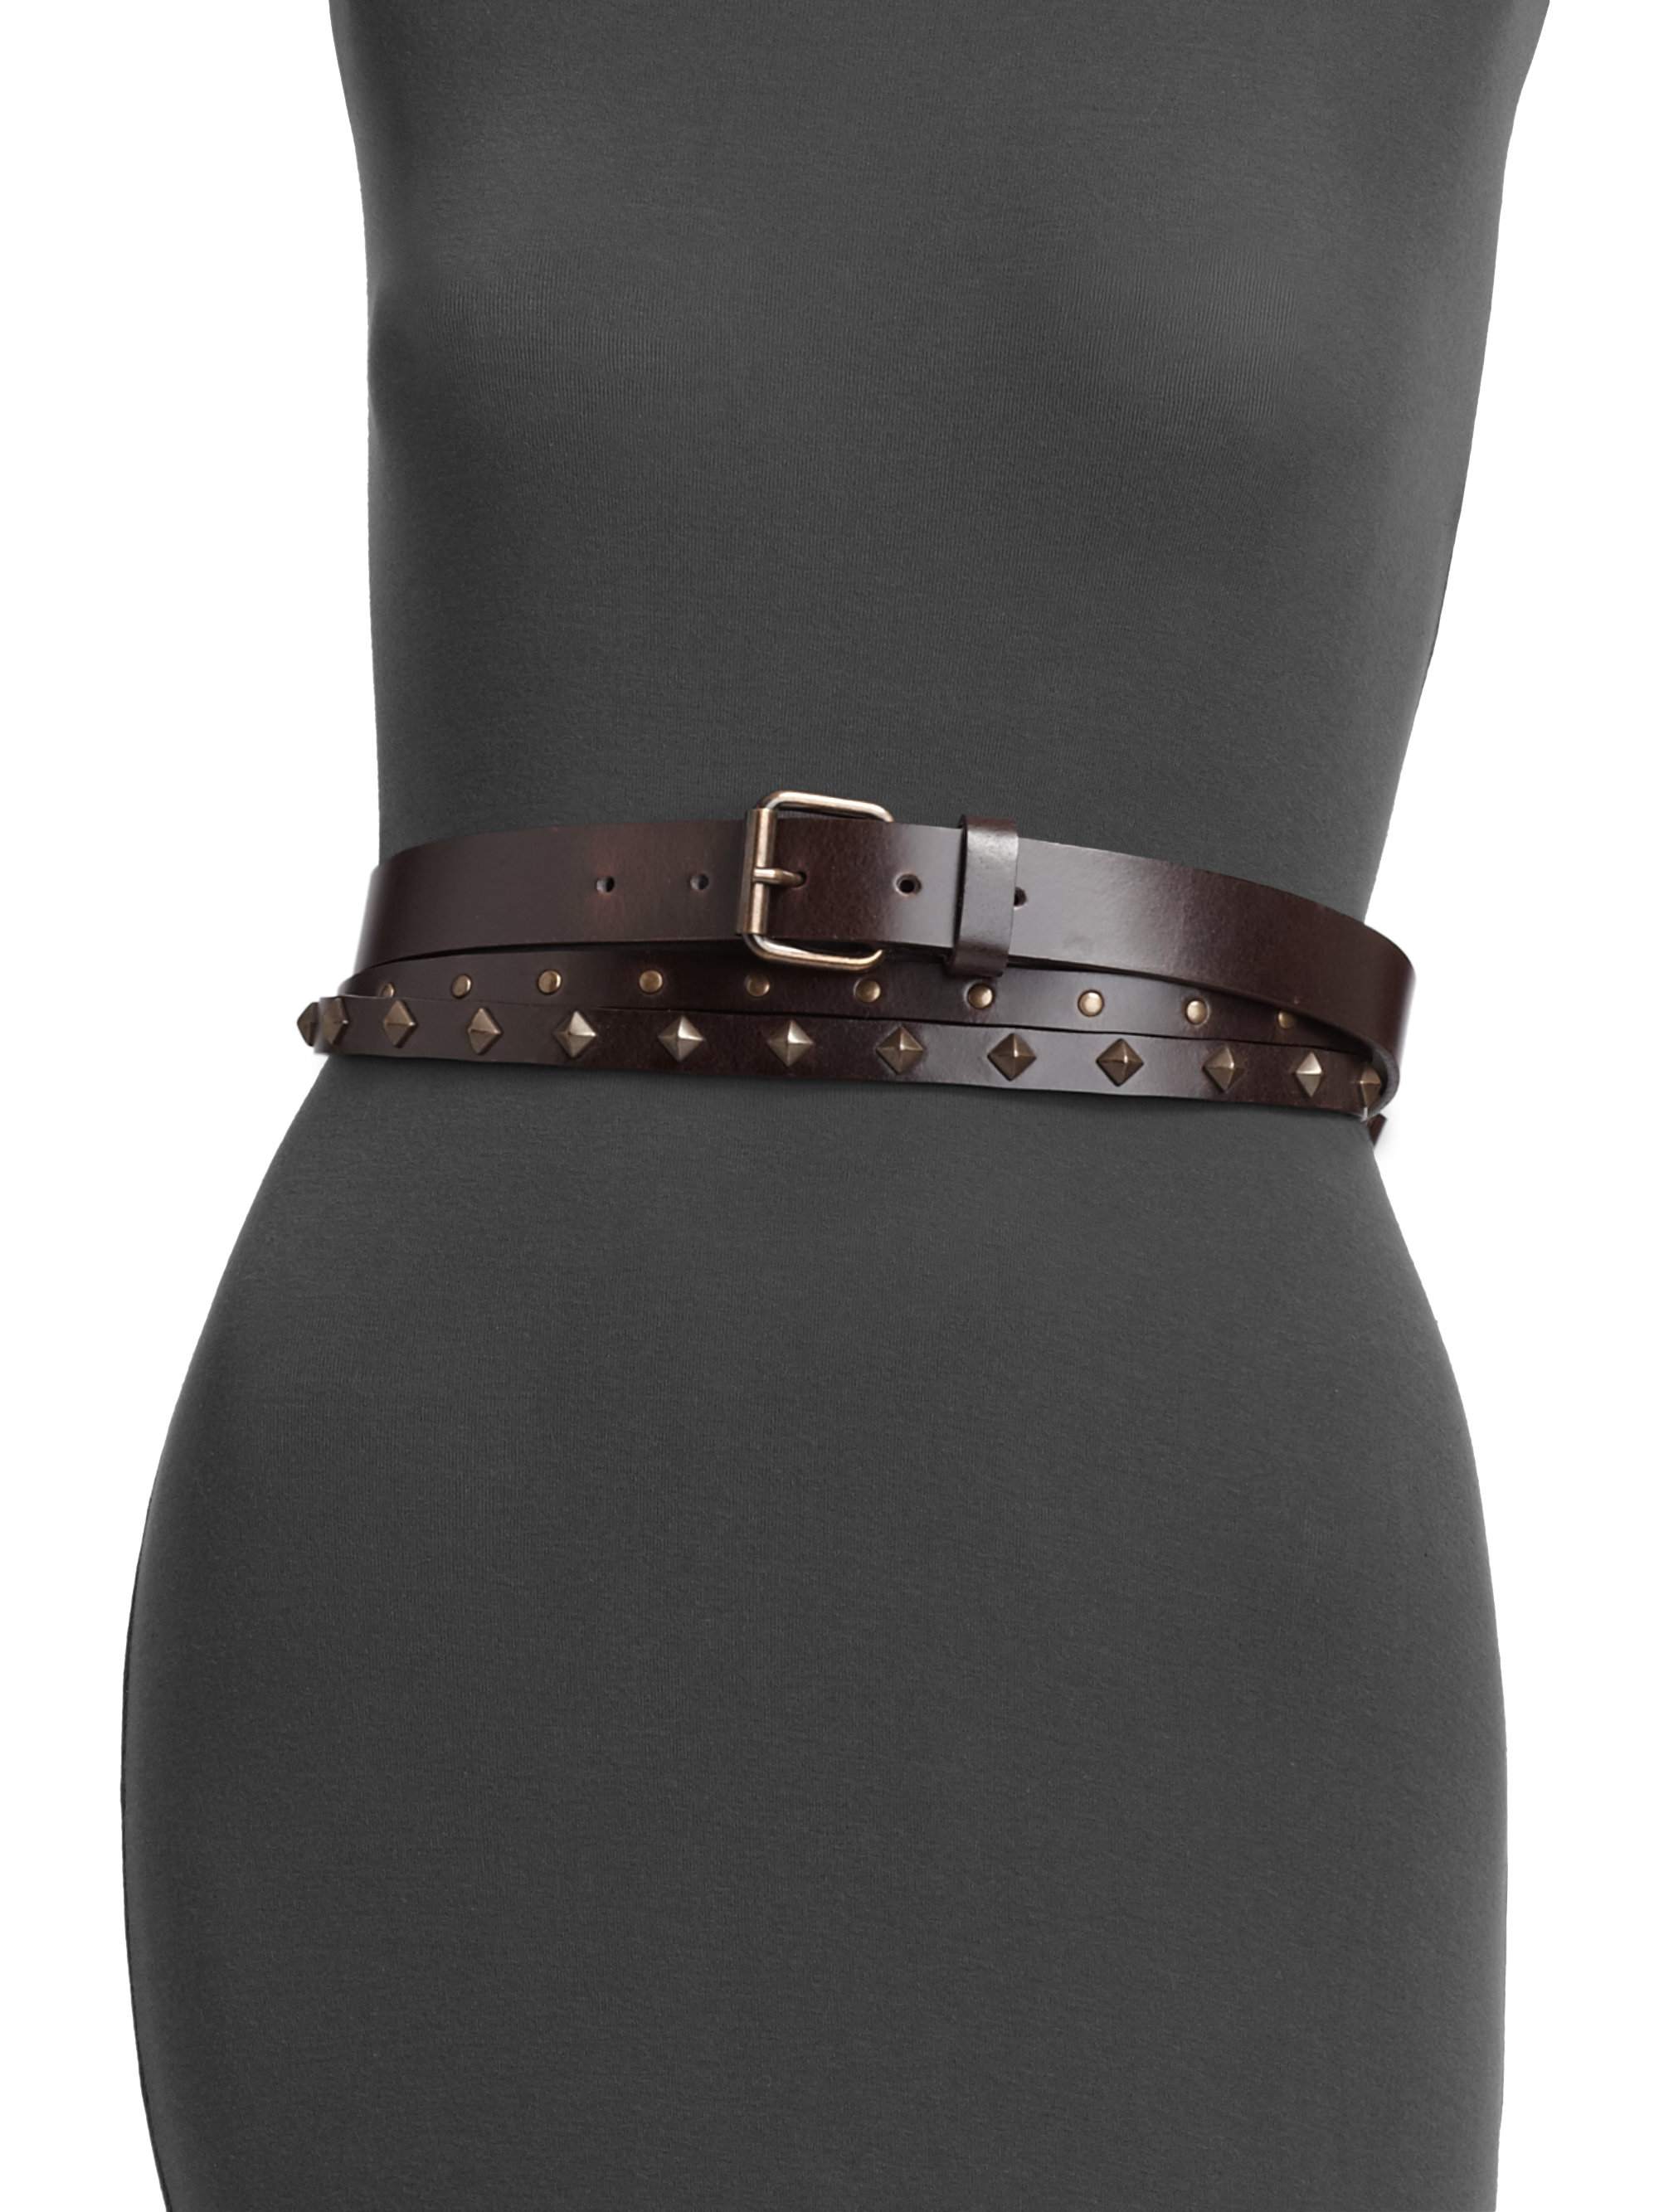 Max Mara Studded Leather Wrap Belt in Brown - Lyst